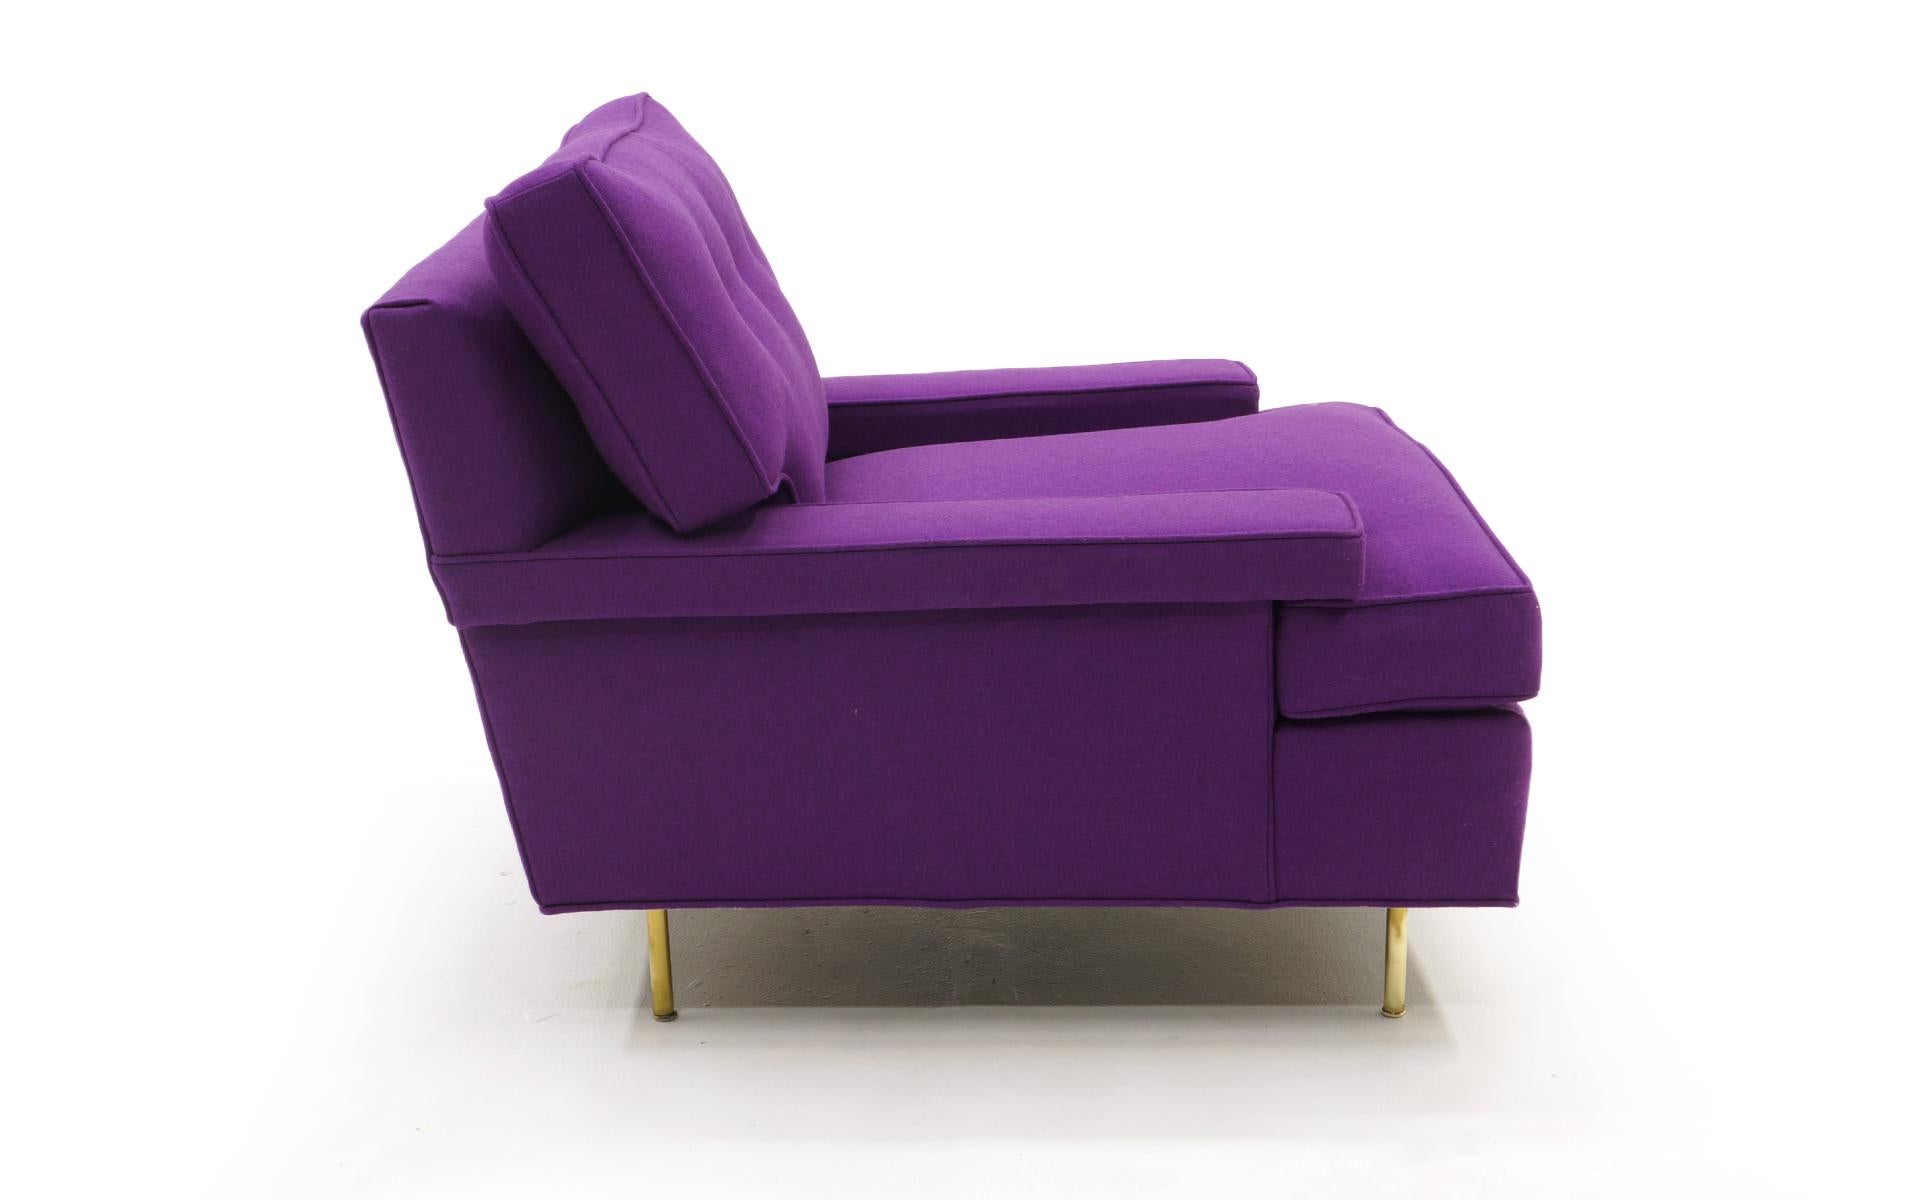 Large and very comfortable lounge chair designed by Harvey Probber. Expertly reupholstered in purple Maharam Hallingdal fabric. Polished brass tubular legs.